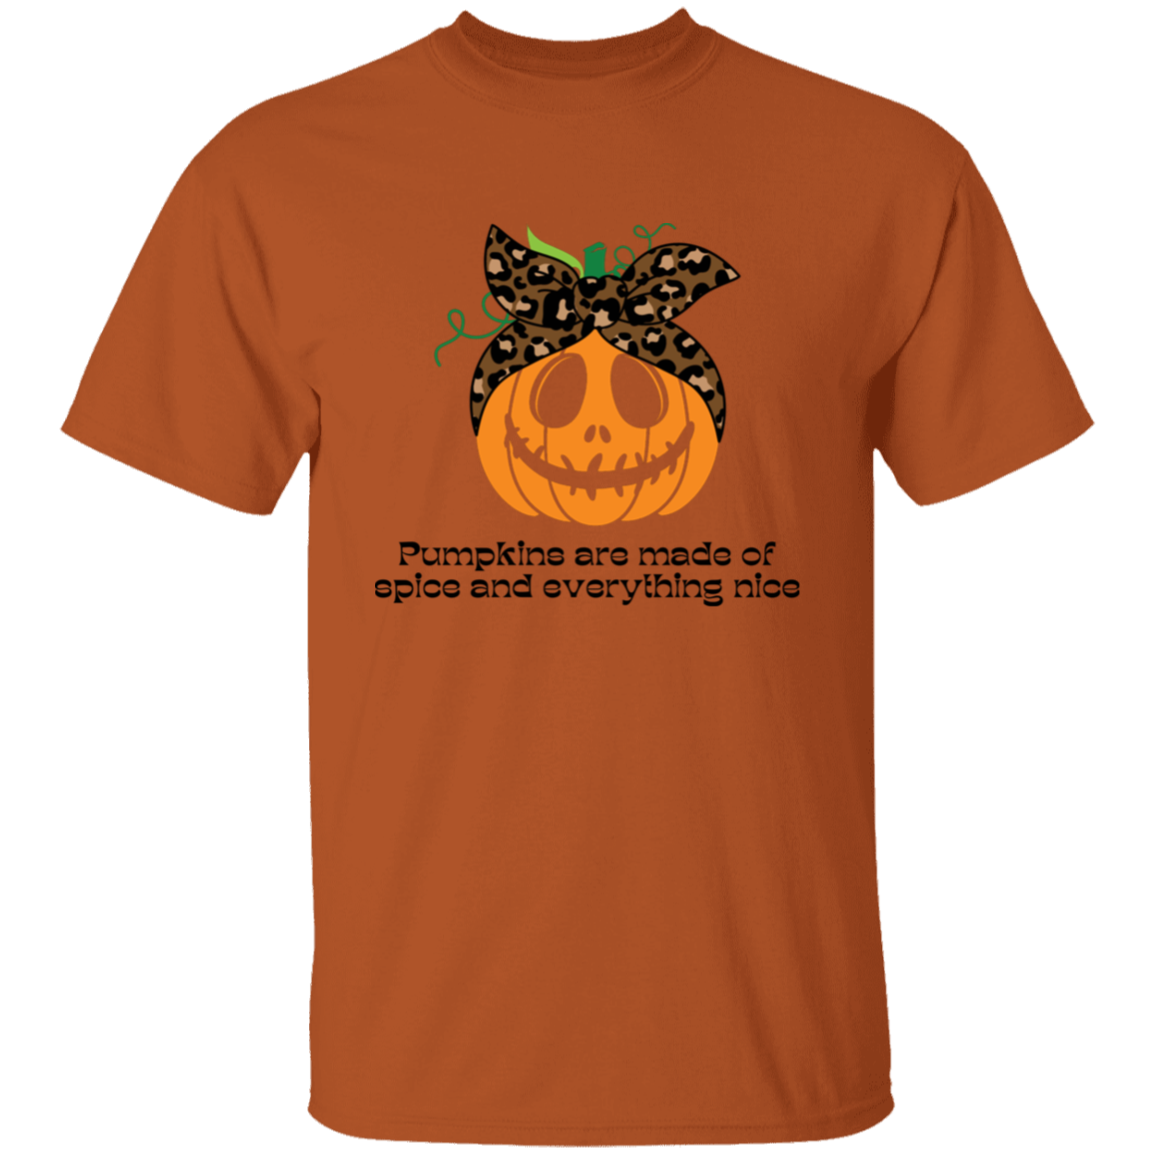 Pumpkins are made of spice and everything nice G500 5.3 oz. T-Shirt